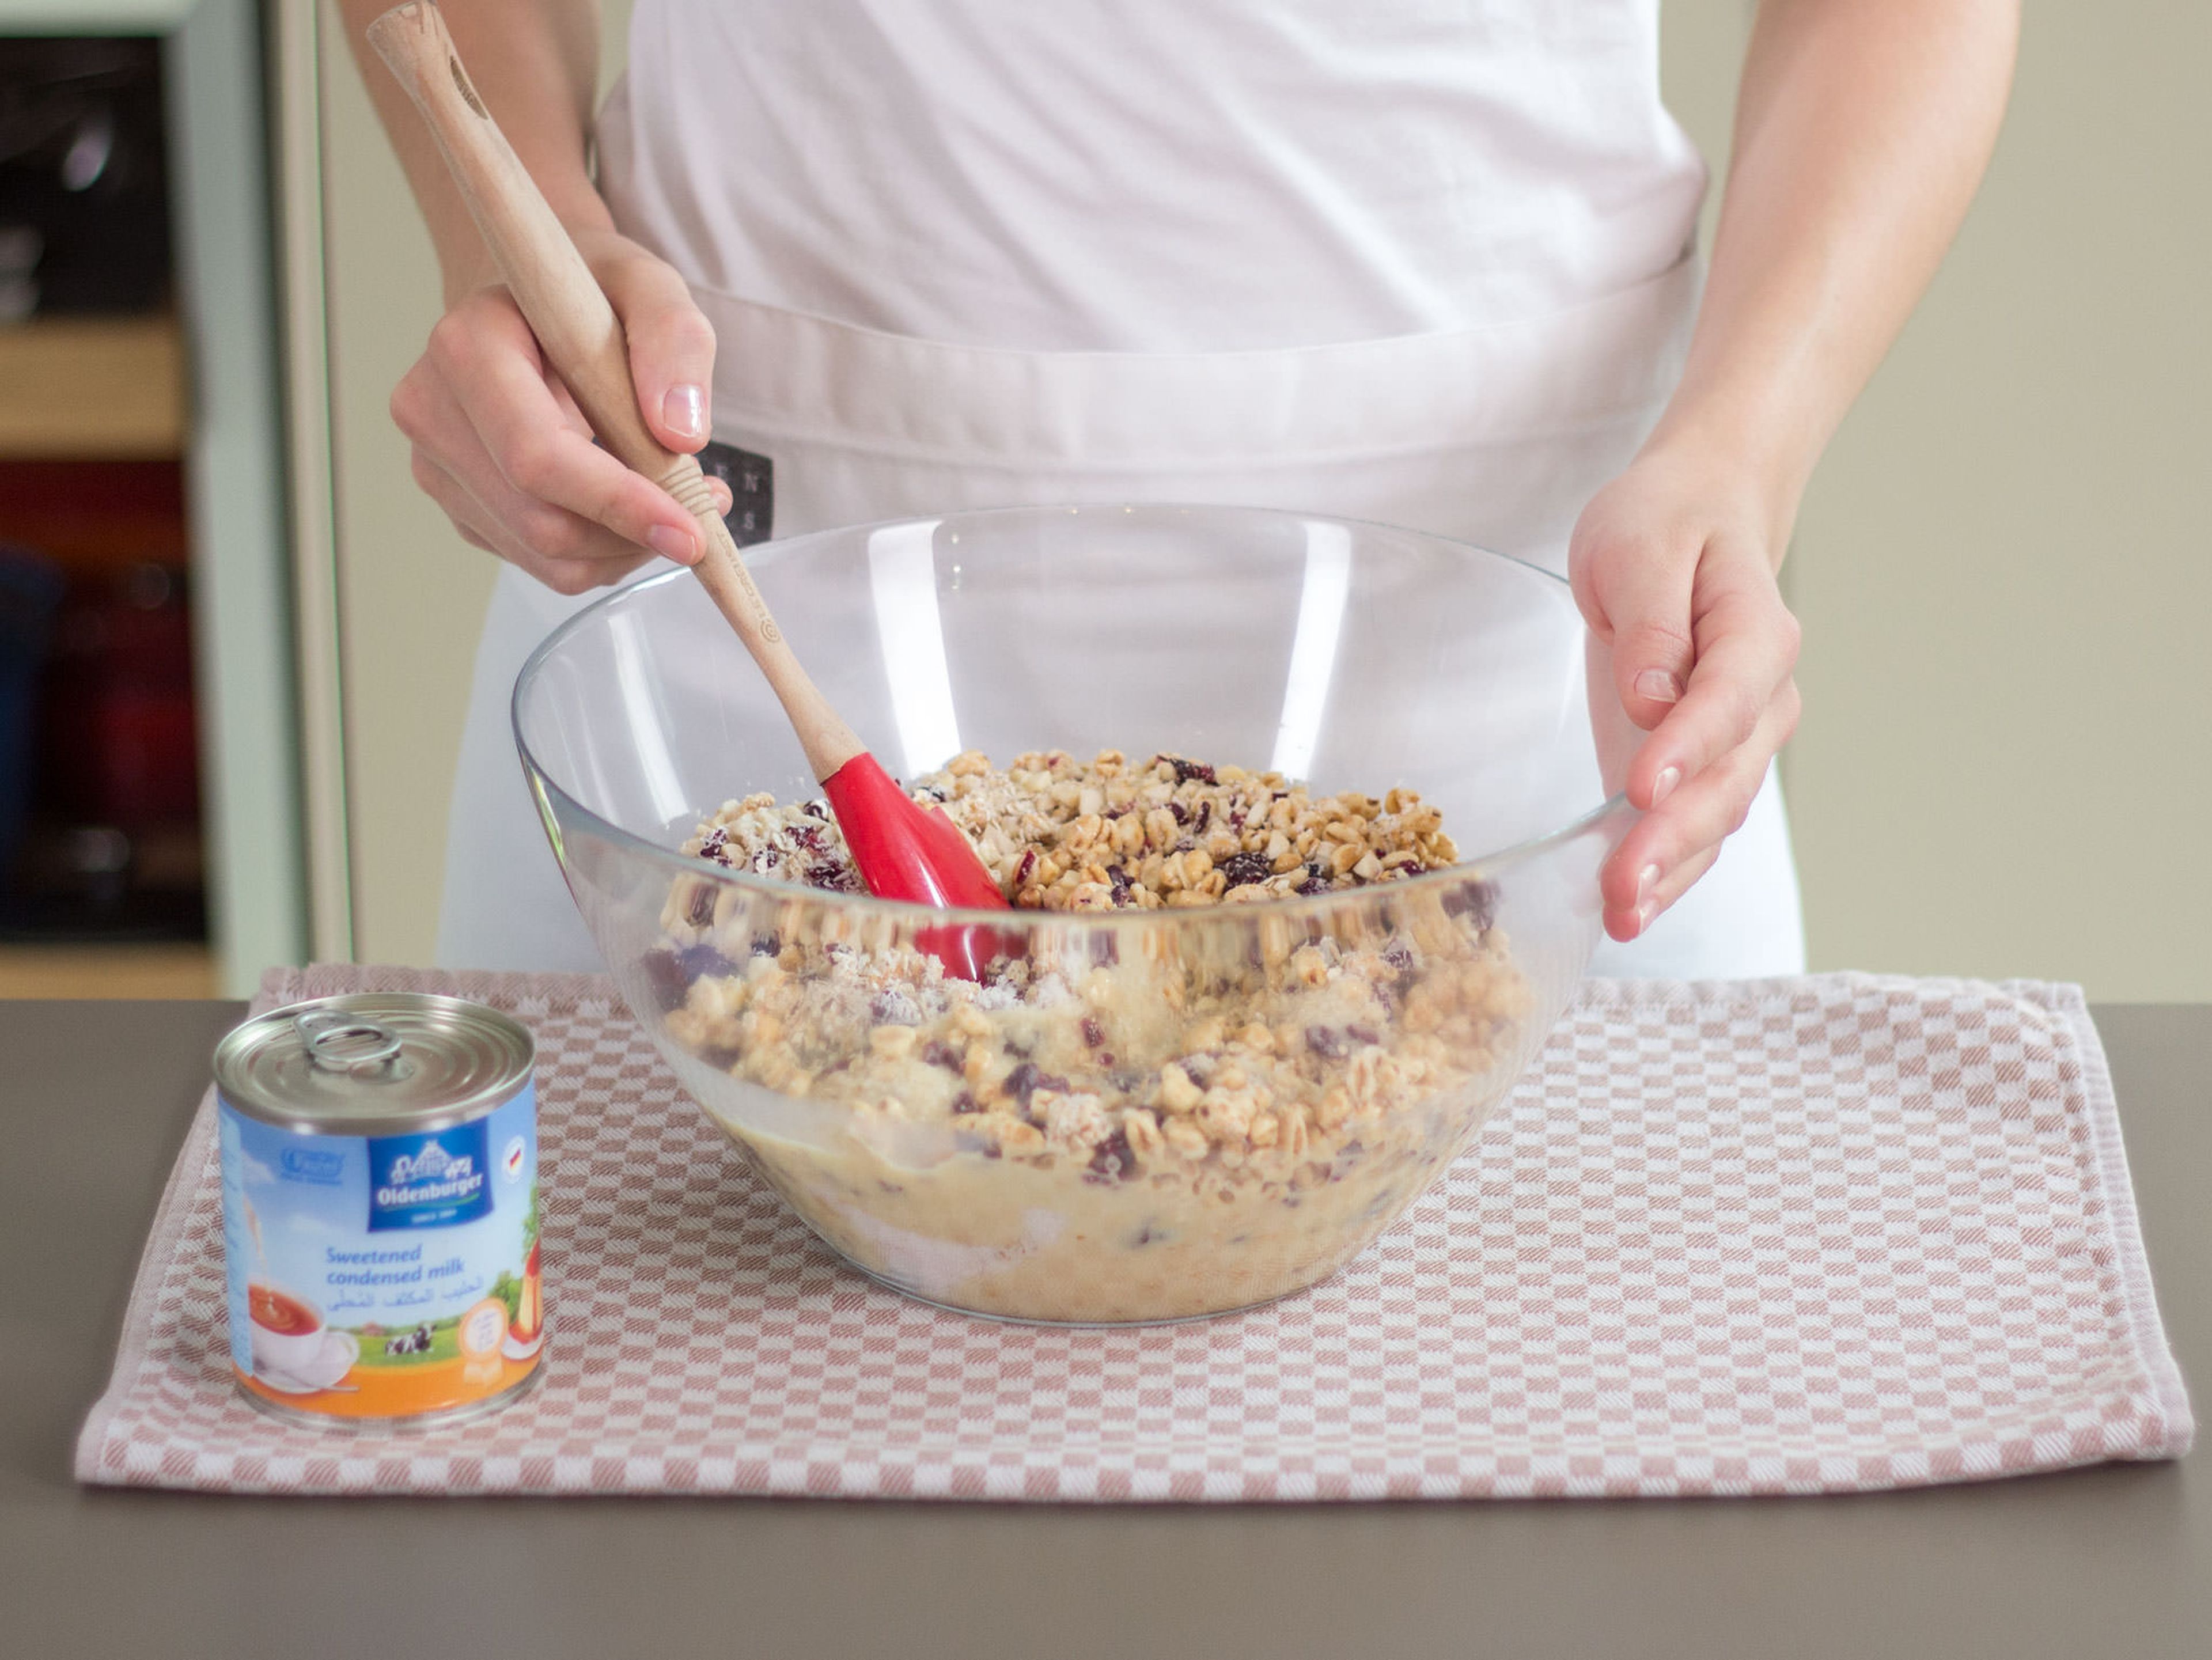 Add warm sweetened condensed milk to bowl and stir thoroughly until ingredients are well combined.